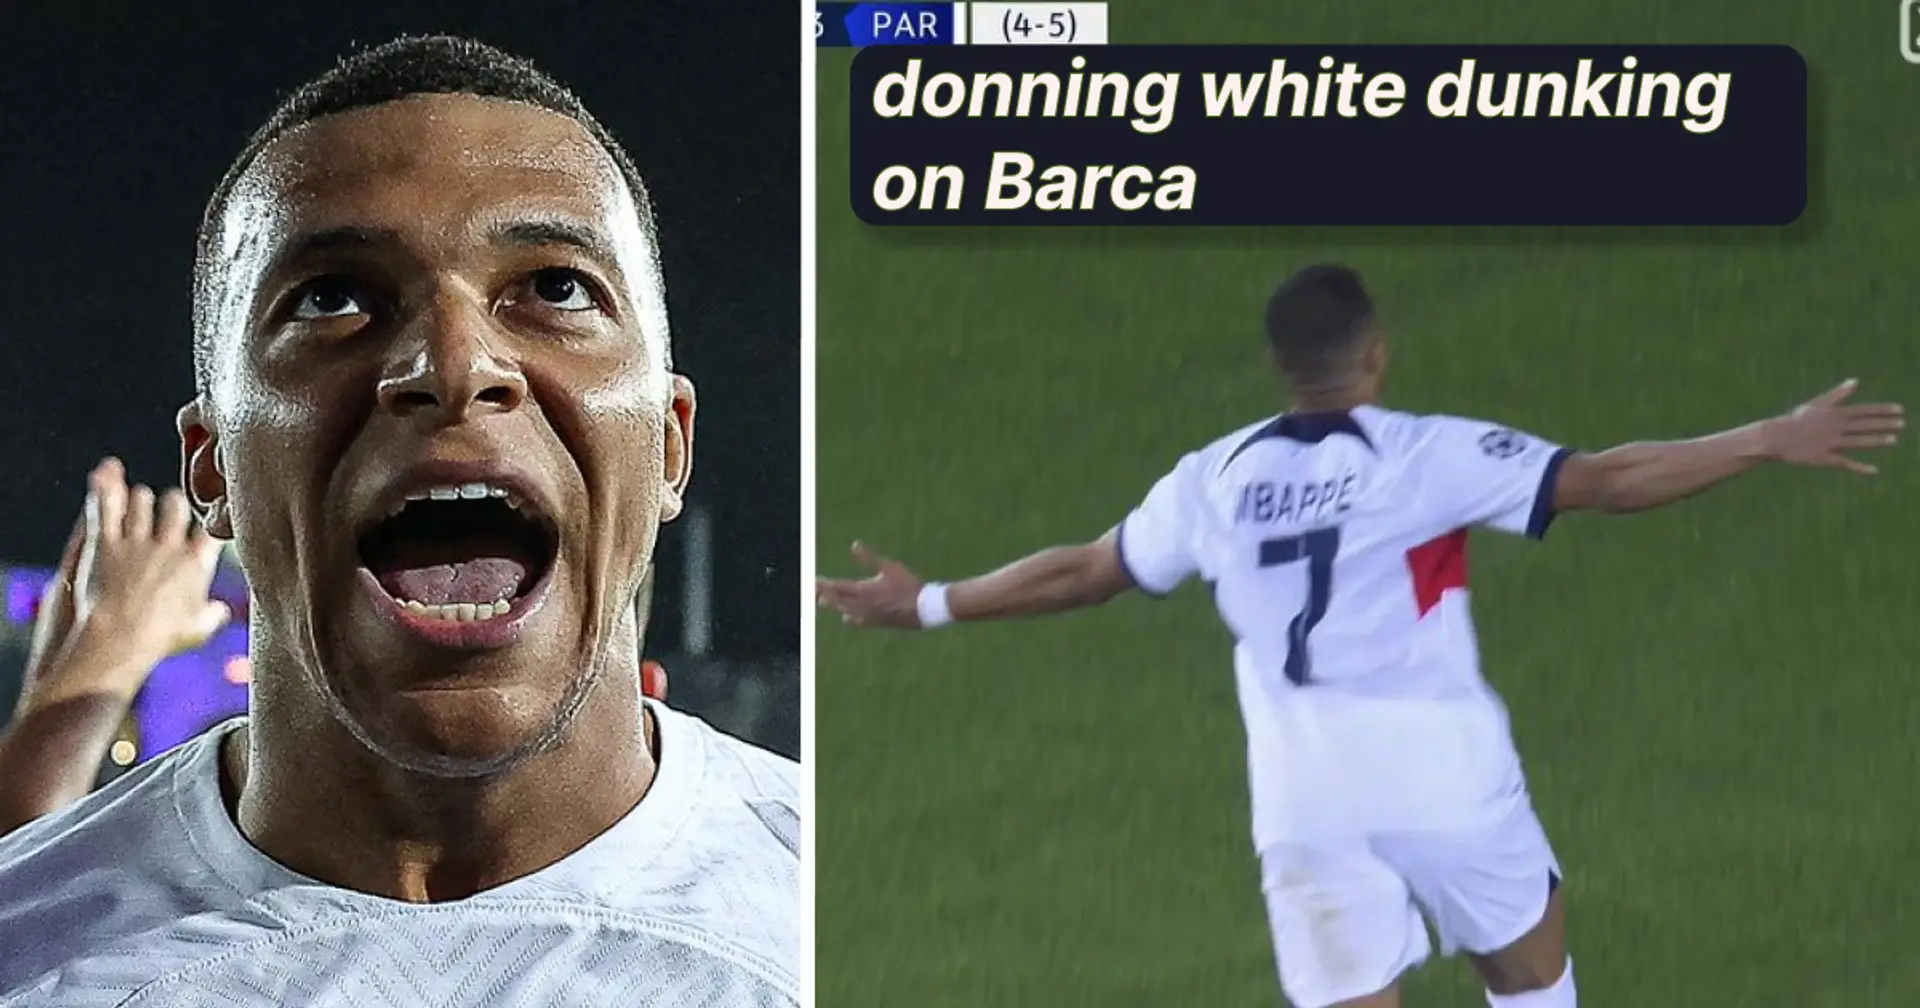 'I’ll be there': Real Madrid fans react as Mbappe destroys Barca while wearing white